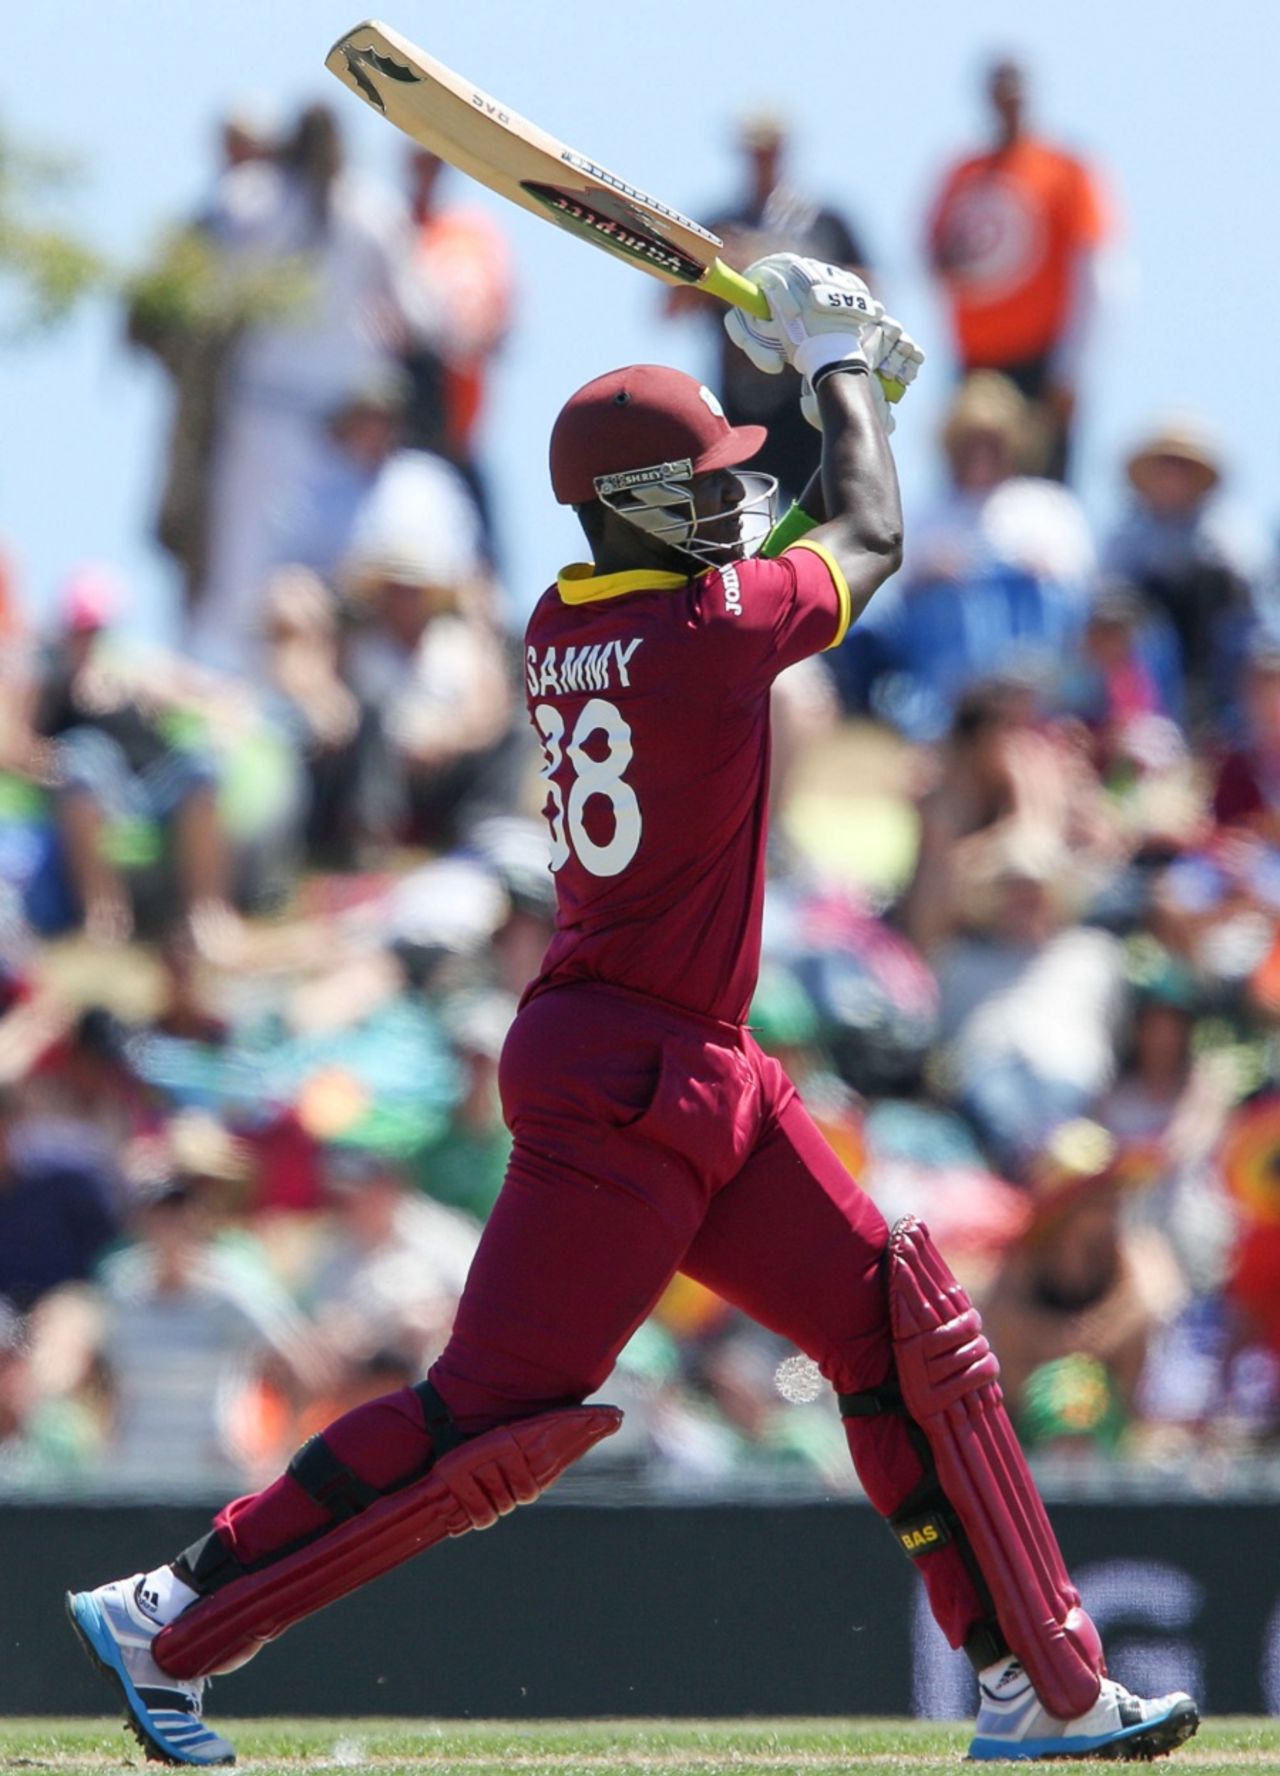 Darren Sammy hits the ball long, Ireland v West Indies, World Cup 2015, Group B, Nelson, February 16, 2015